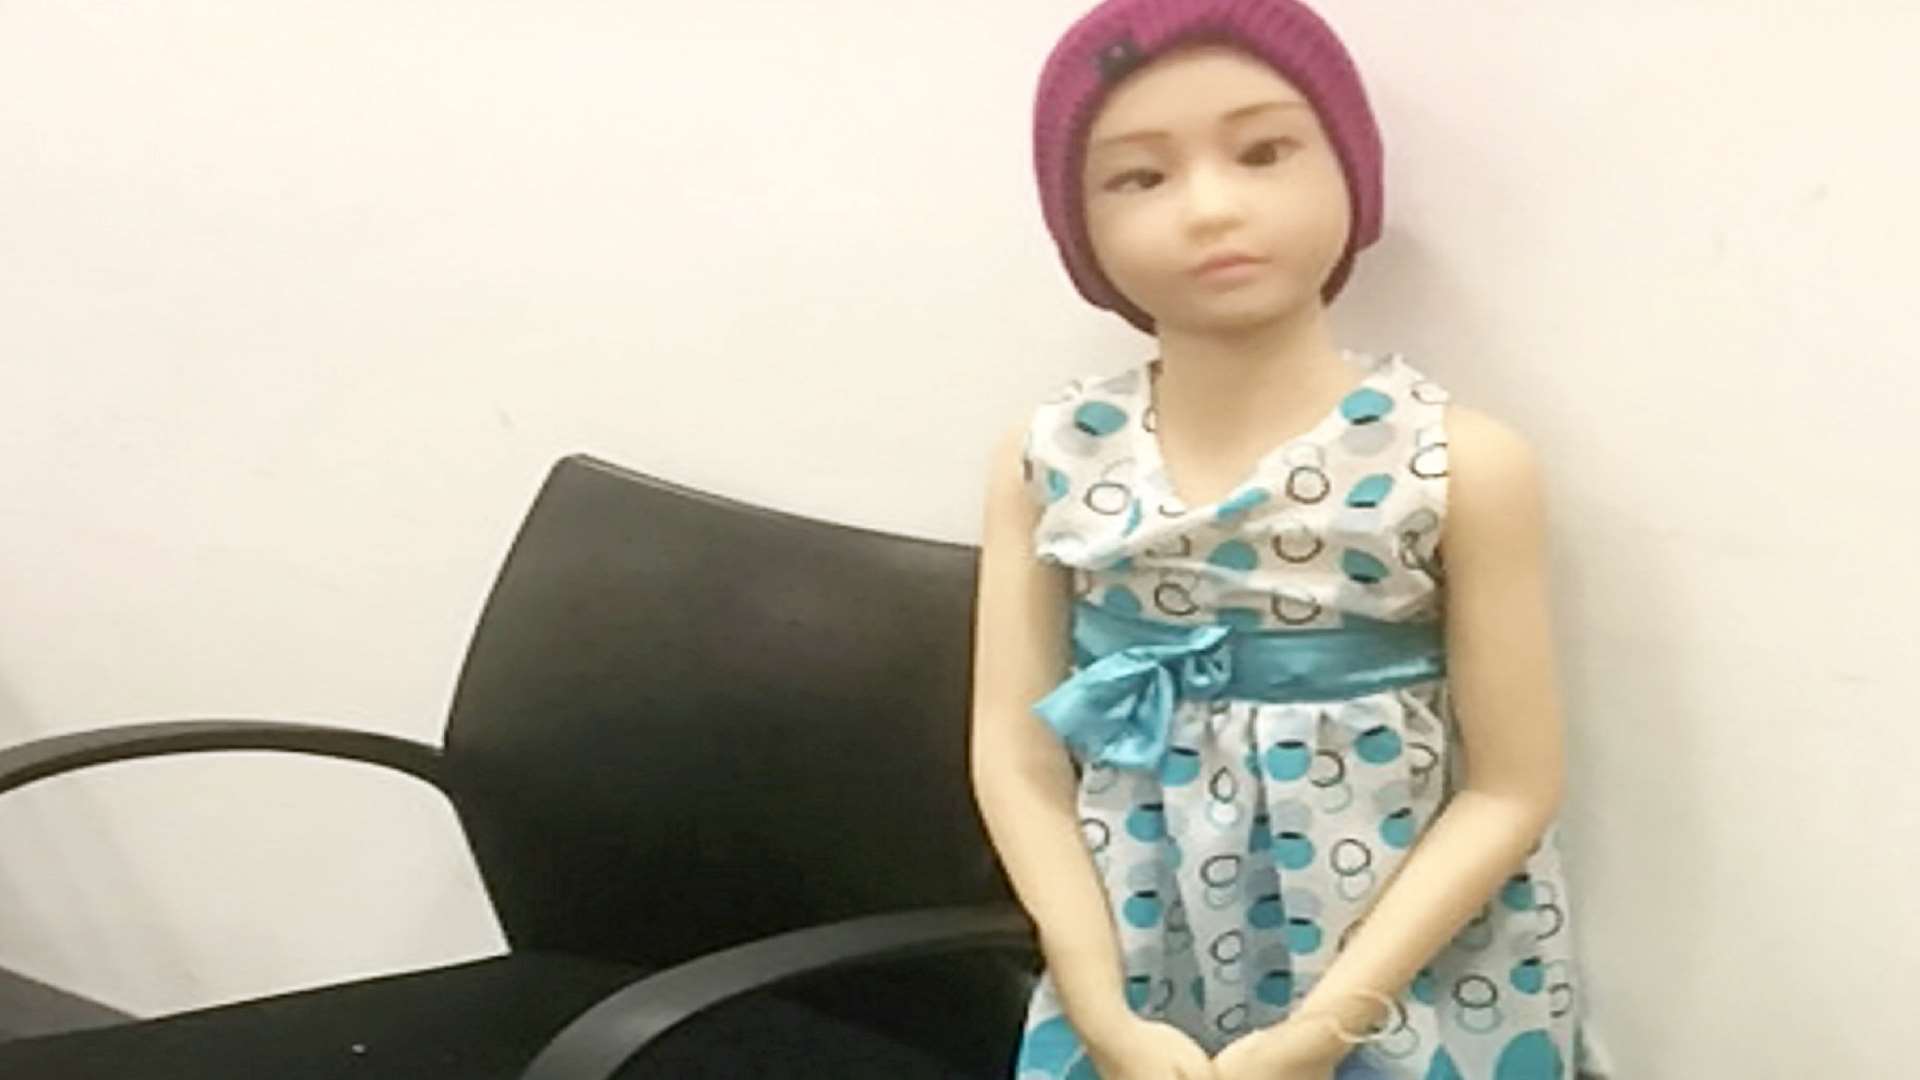 The doll that David Turner was charged over. Picture: NCA.